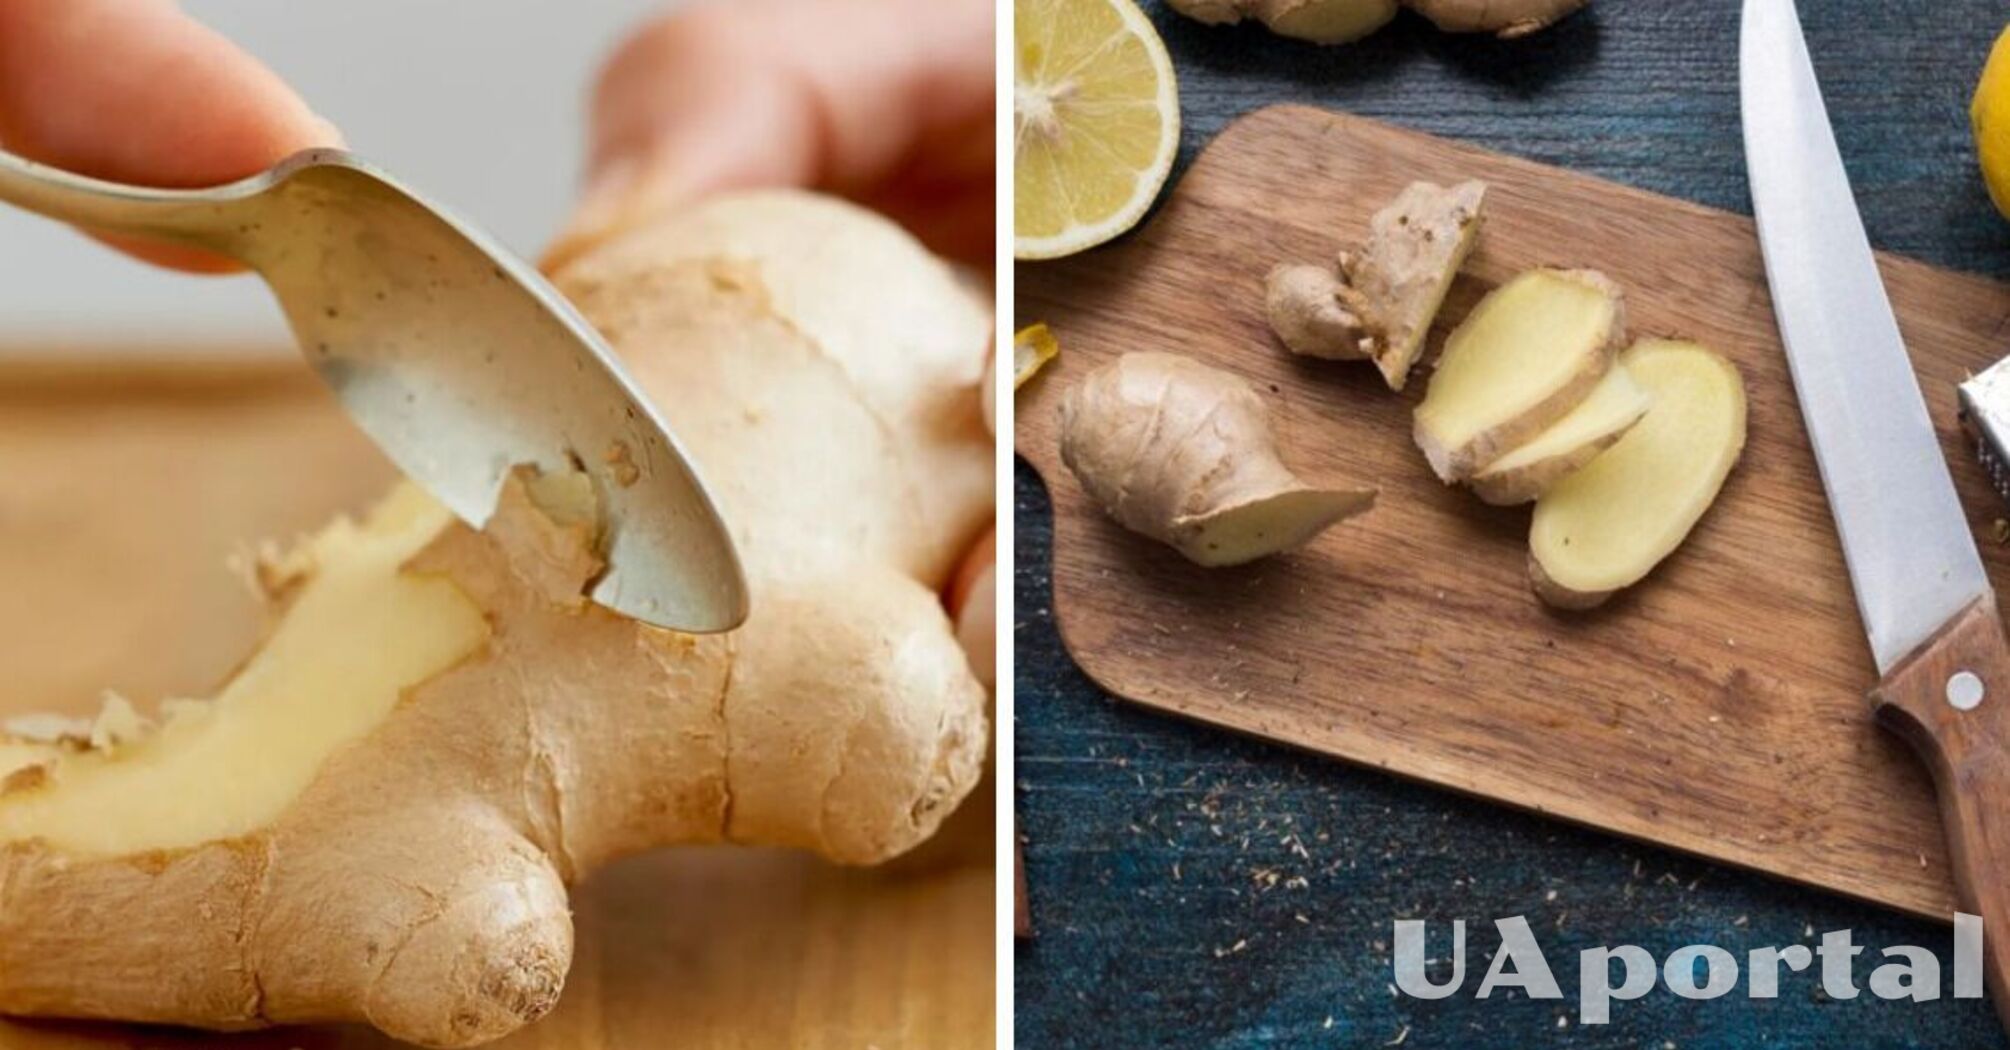 Is it necessary to peel ginger root before use